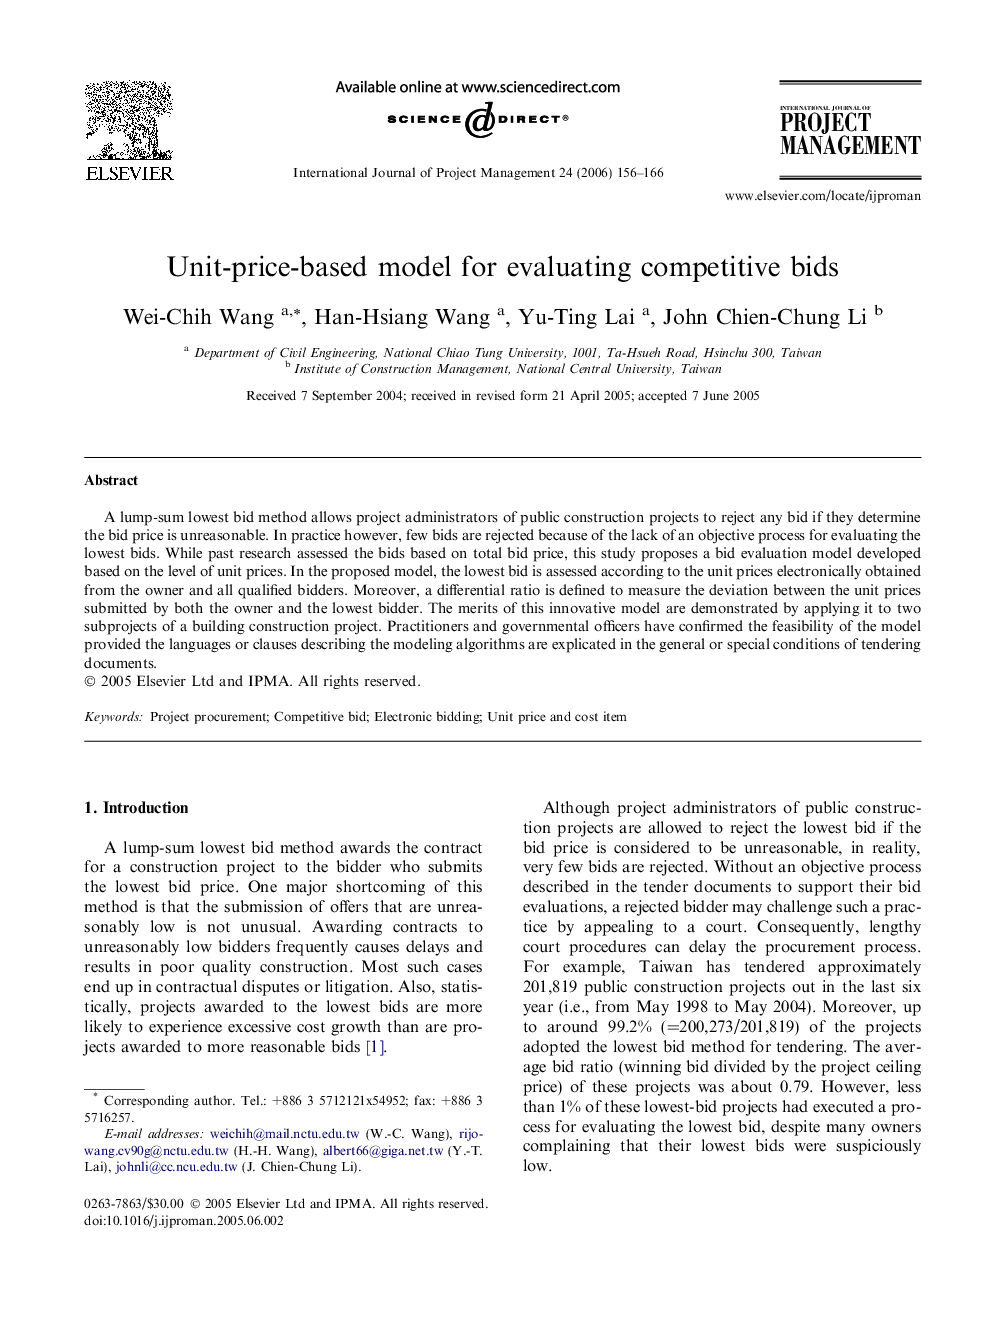 Unit-price-based model for evaluating competitive bids